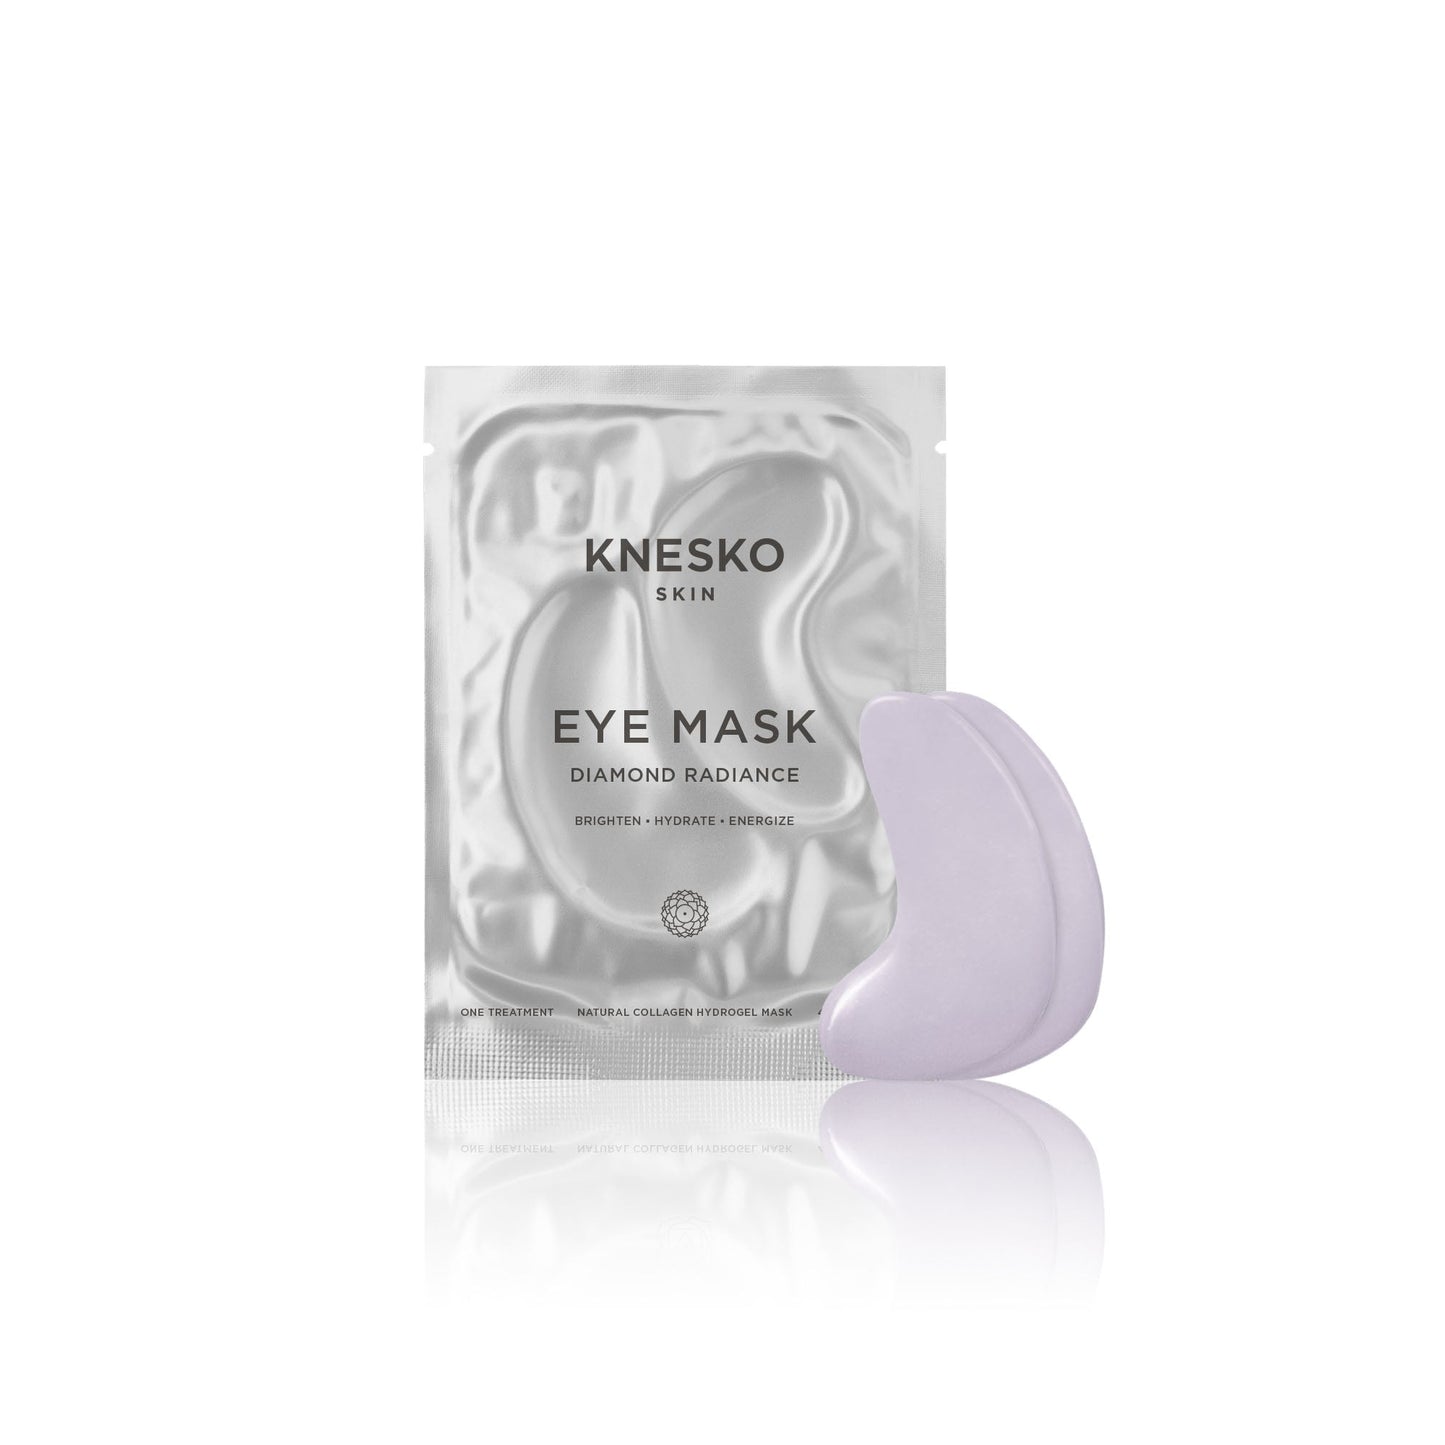 Buy Online Best Diamond Eye Mask - 4 Treatments | Buy innovative clinical skincare products - TOPBODY